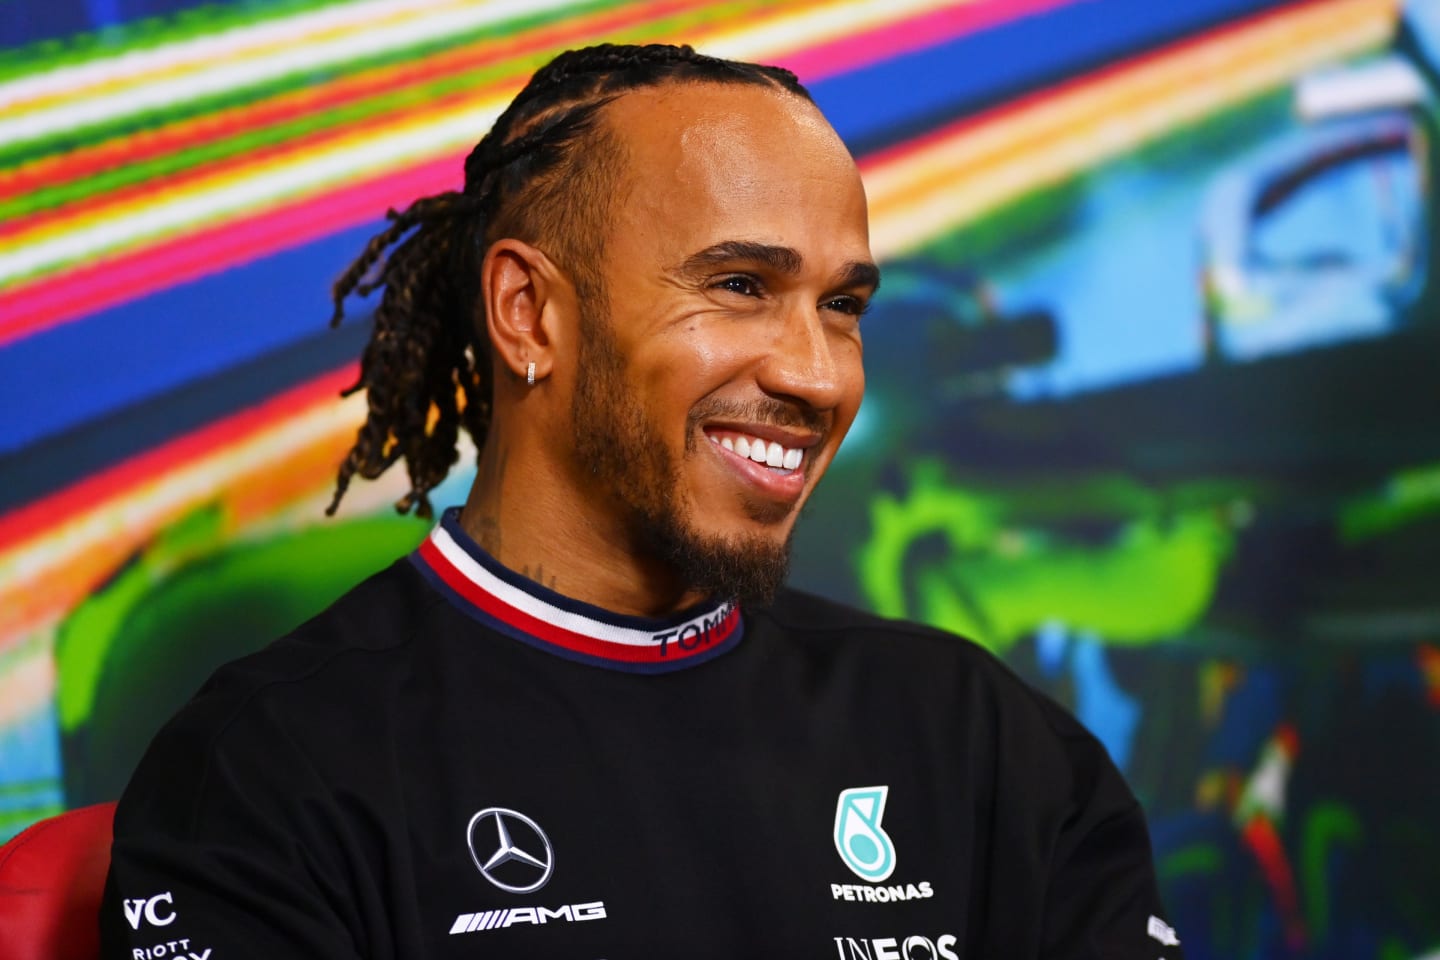 MONZA, ITALY - SEPTEMBER 08: Lewis Hamilton of Great Britain and Mercedes attends the Drivers Press Conference during previews ahead of the F1 Grand Prix of Italy at Autodromo Nazionale Monza on September 08, 2022 in Monza, Italy. (Photo by Dan Mullan/Getty Images)